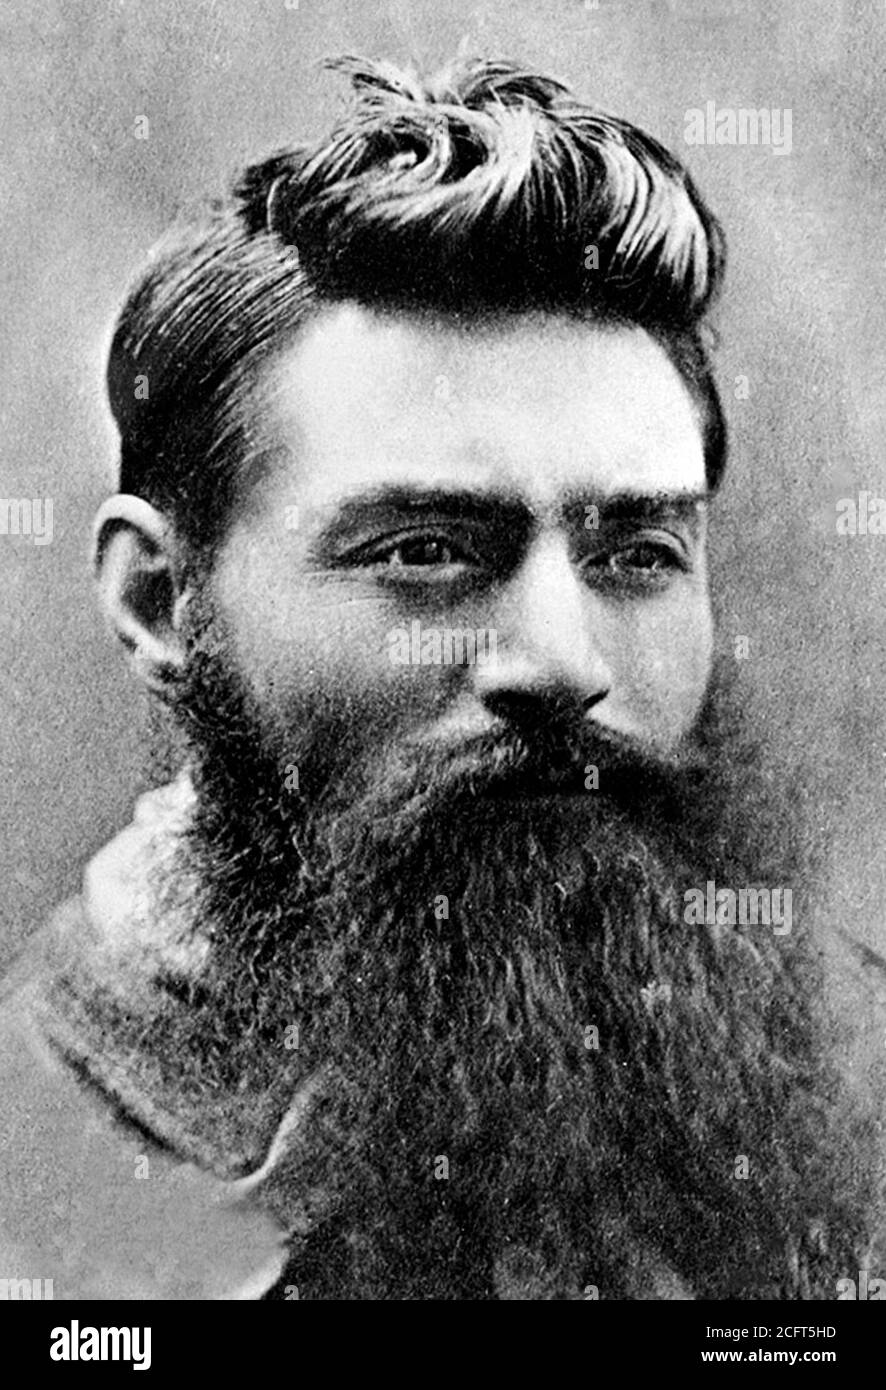 ned-kelly-police-photograph-of-the-australian-outlaw-ned-kelly-taken-in-november-1880-the-day-before-he-was-hanged-2CFT5HD.jpg